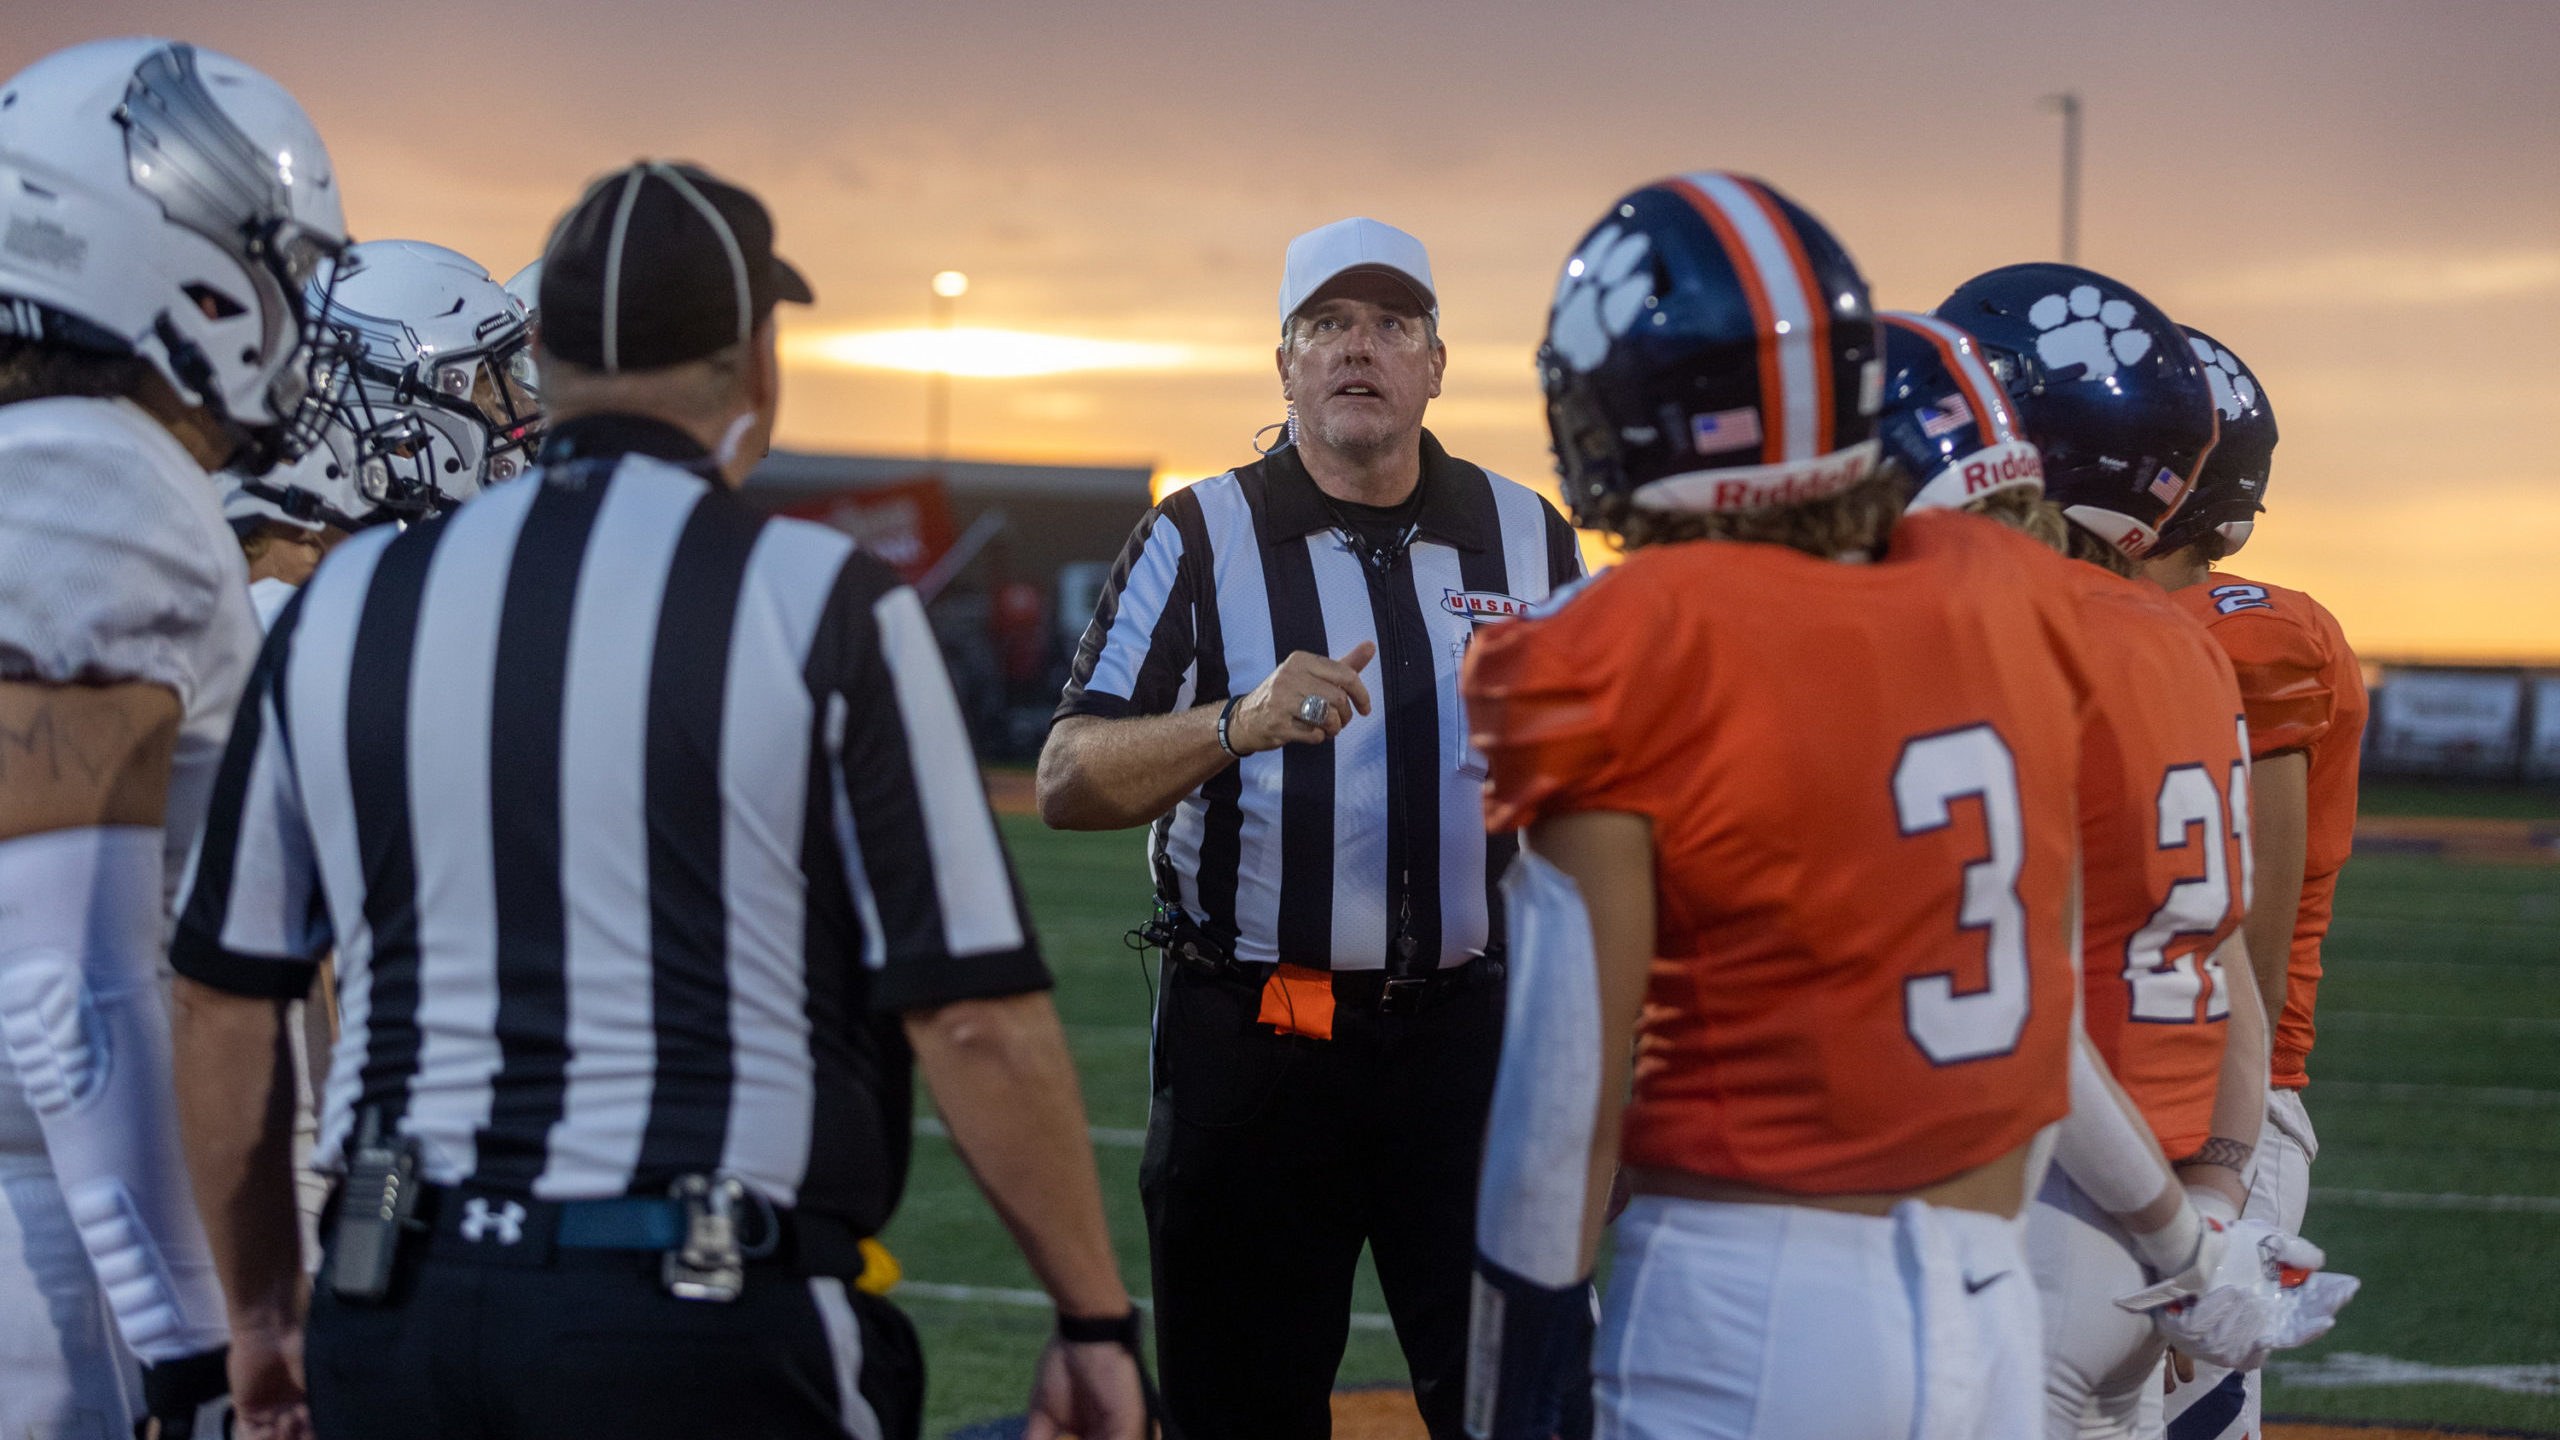 A referee tosses a coin before a football game between Brighton and Desert Hills in Cottonwood Heig...